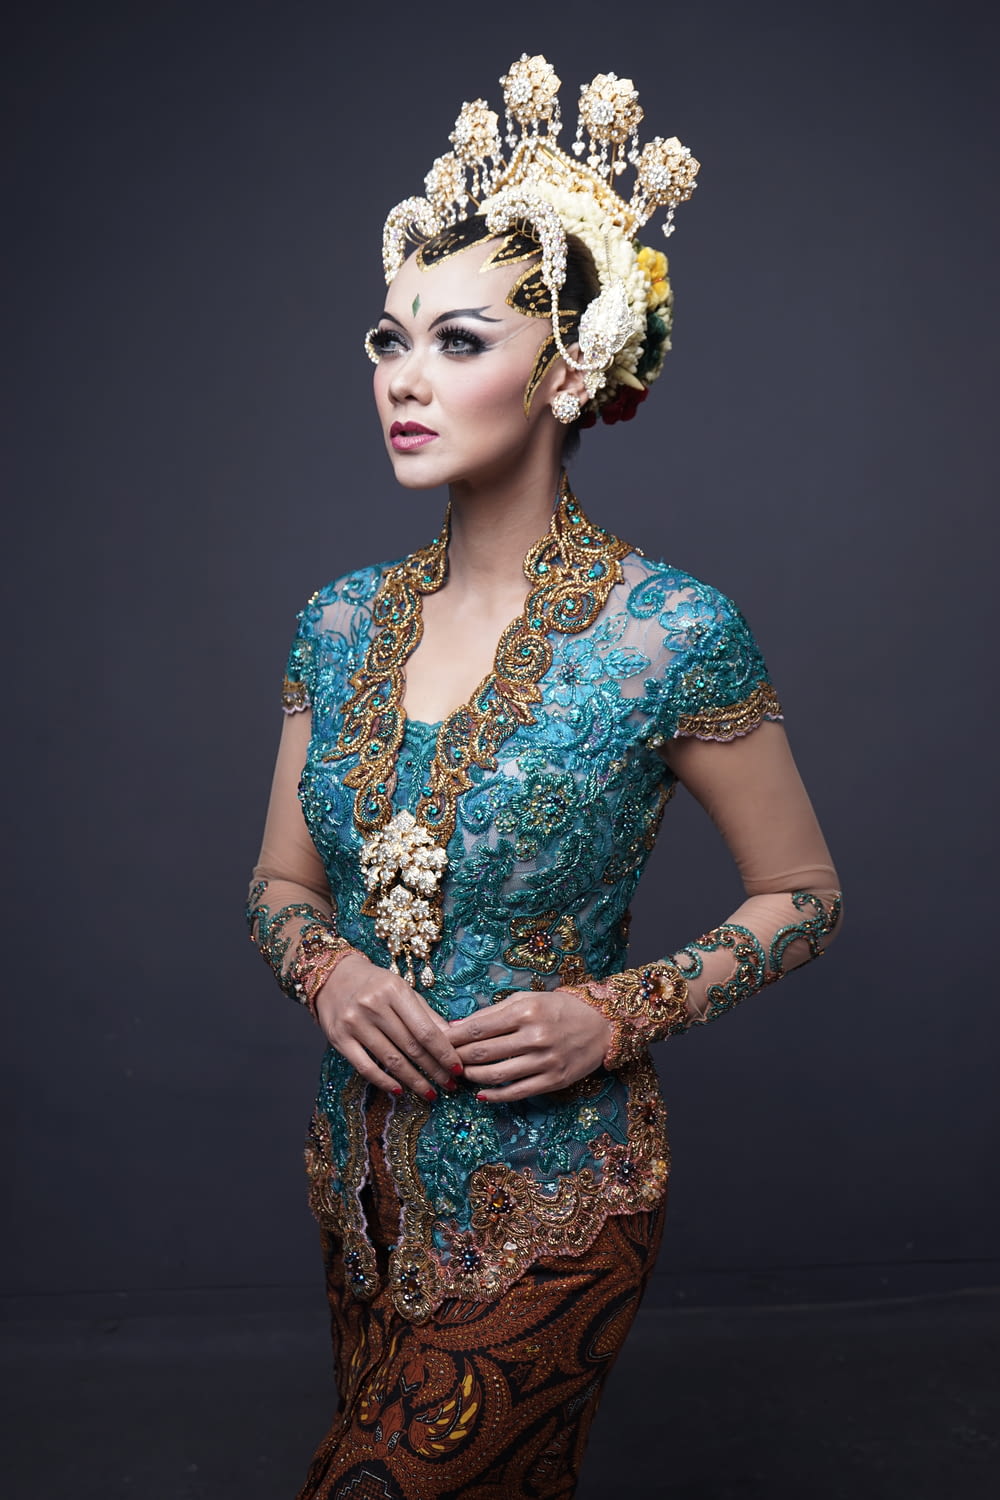 woman in blue and brown floral dress wearing white floral headdress